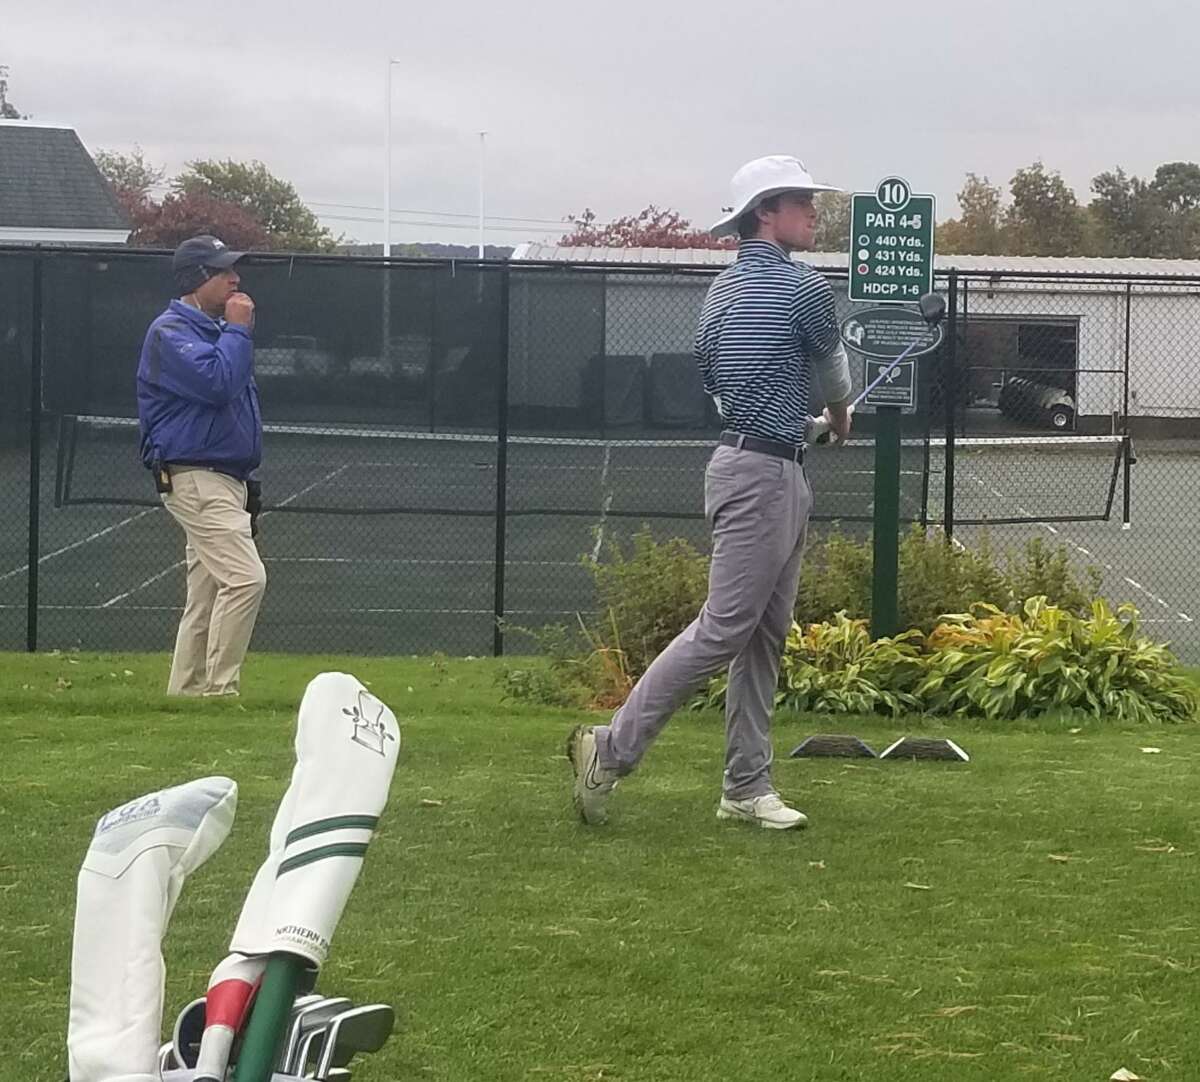 Glastonbury's Connor Goode was the medalist at the Division I state championship meet, shooting an even-par 70 at Chippanee Country Club in Bristol on Oct. 18, 2021.